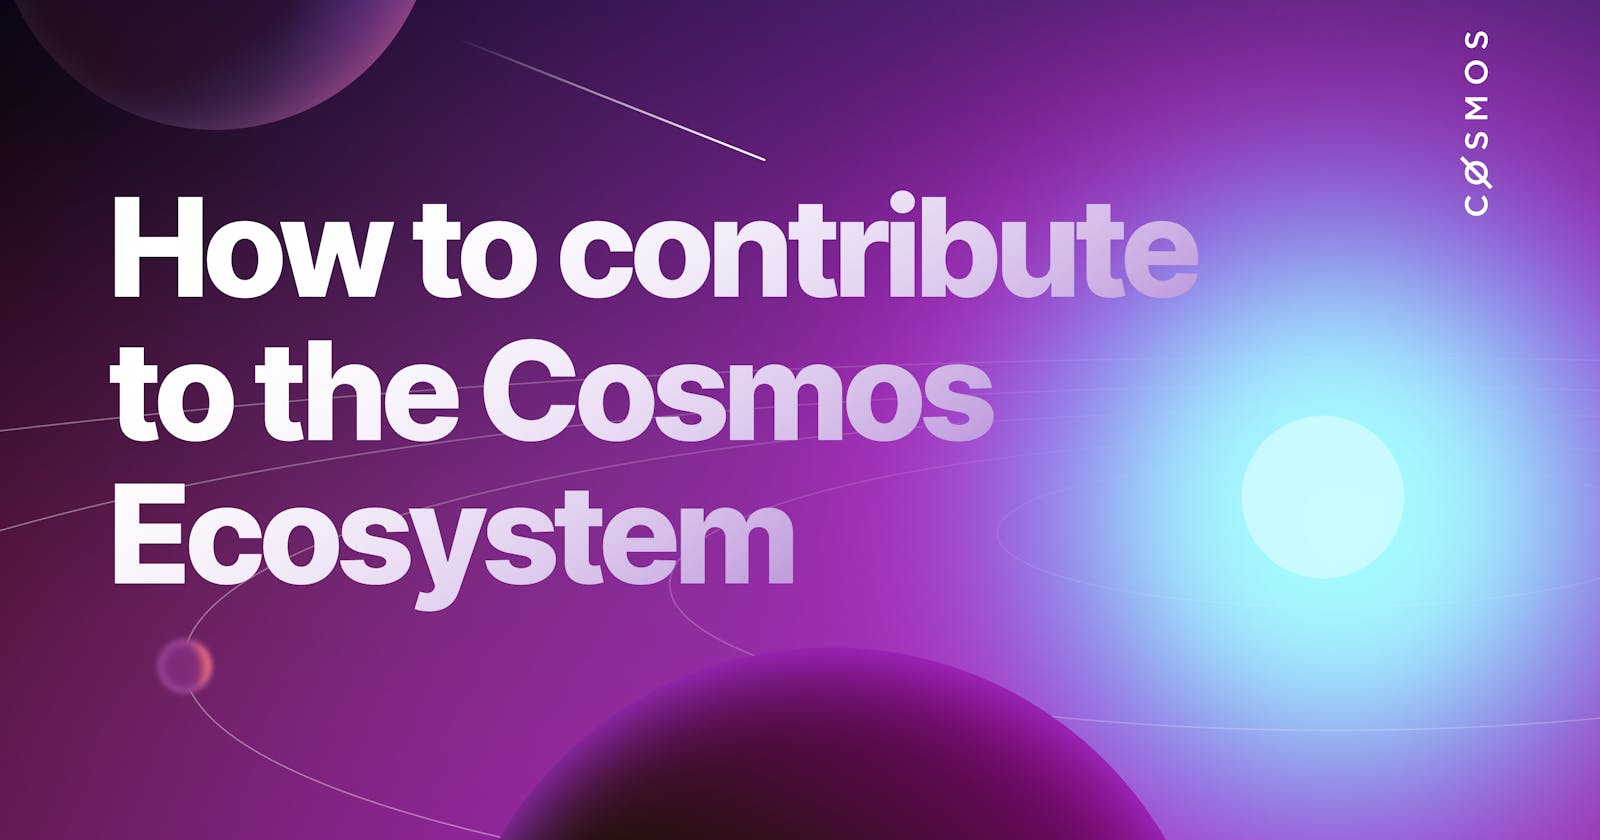 How can you contribute to the Cosmos Ecosystem